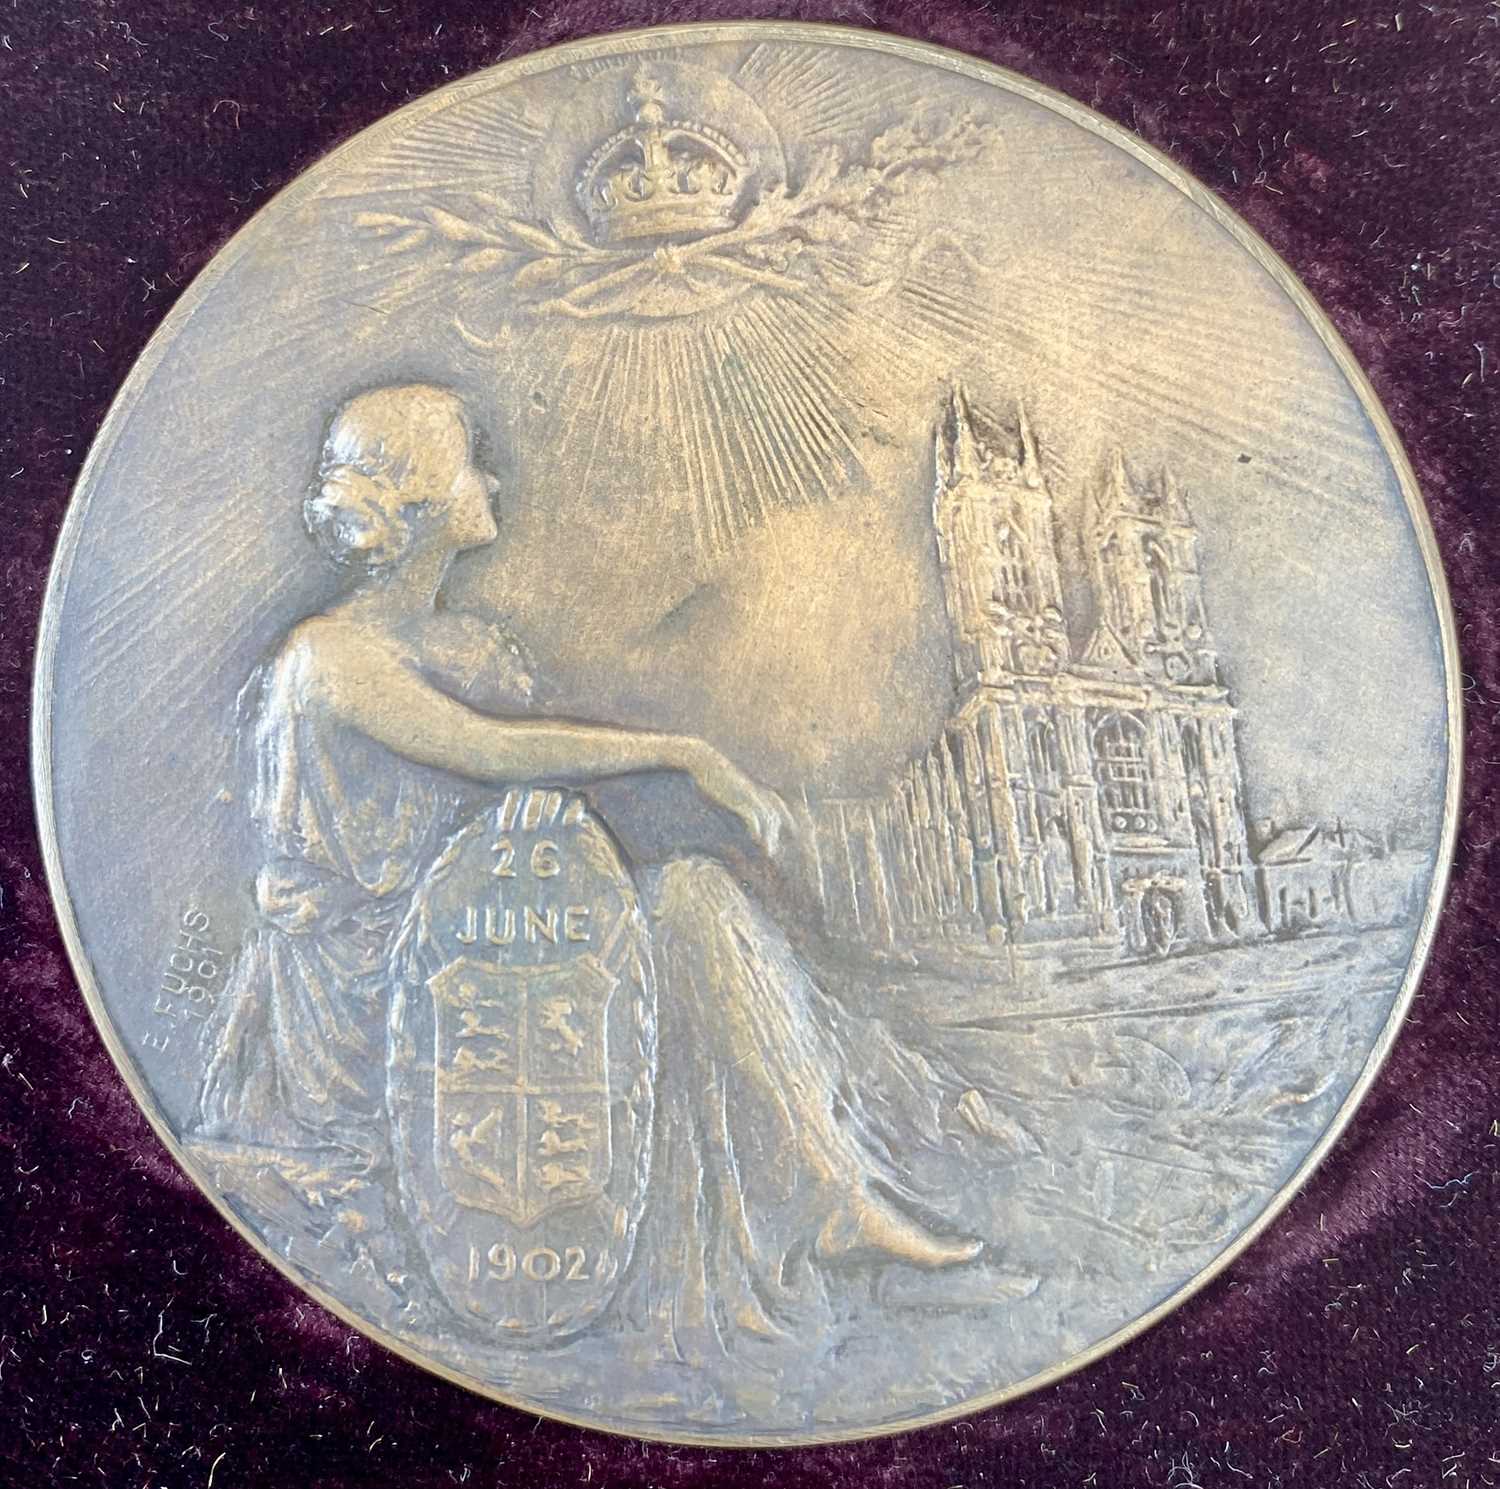 KING EDWARD VII & QUEEN ALEXANDRA LARGE BRONZE CORONATION MEDAL / PLAQUE by Elkington & Co. - Image 3 of 3